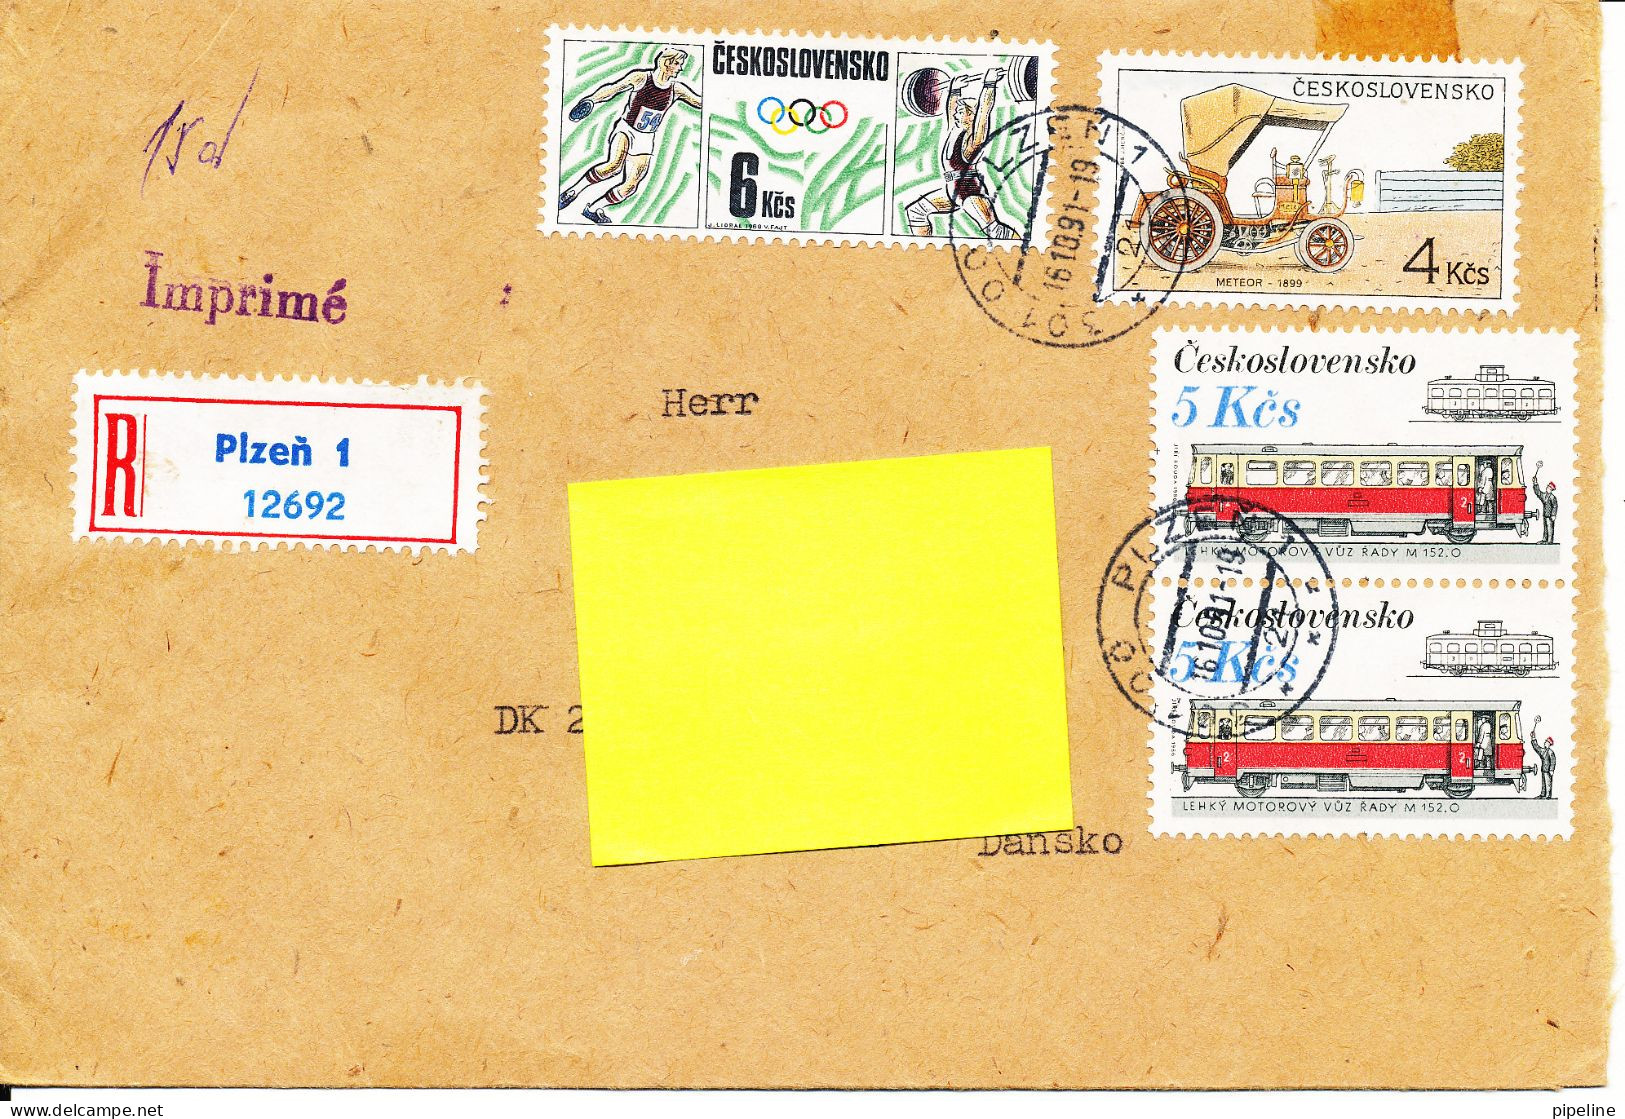 Czechoslovakia Registered Cover Sent To Denmark 16-10-1991 With More Topic Stamps - Brieven En Documenten